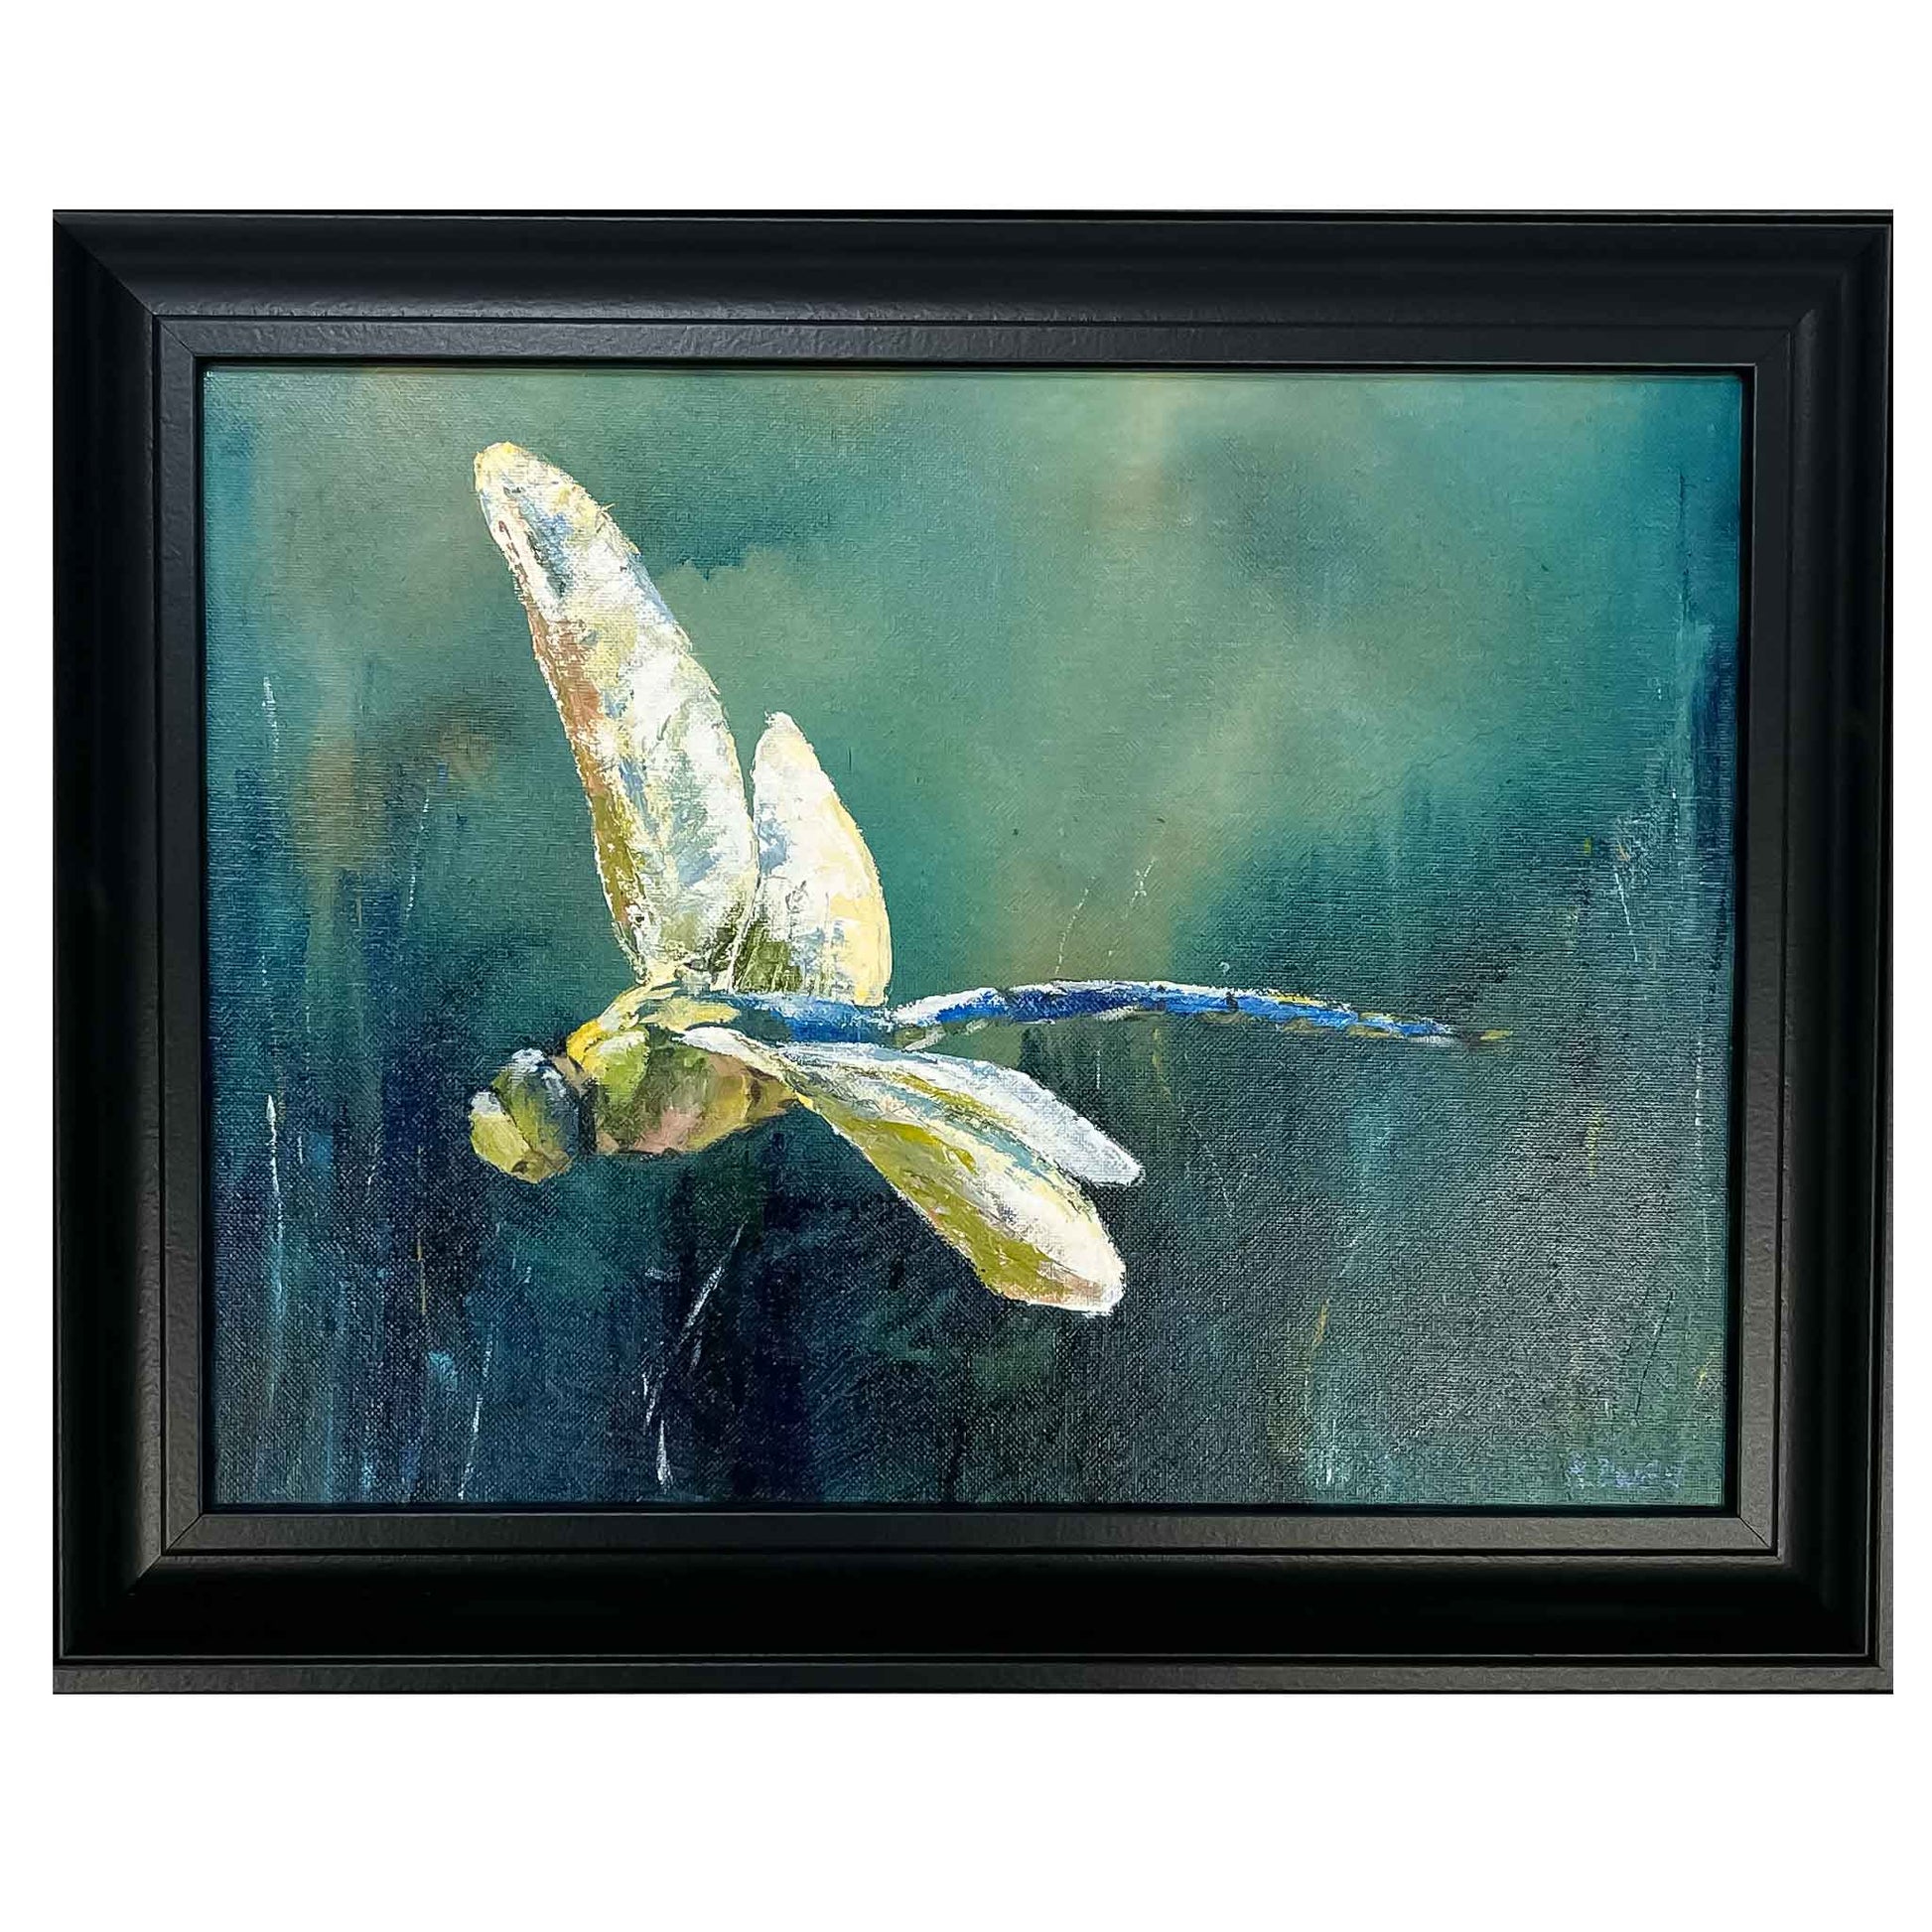 JRO In Flight - Dragonfly Swooping Down Painting by Artist Becky Owen. An original acrylic painting. Brilliant yellow dragonfly set against a blue and green background. Framed in a black wooden frame. 14" x 17".